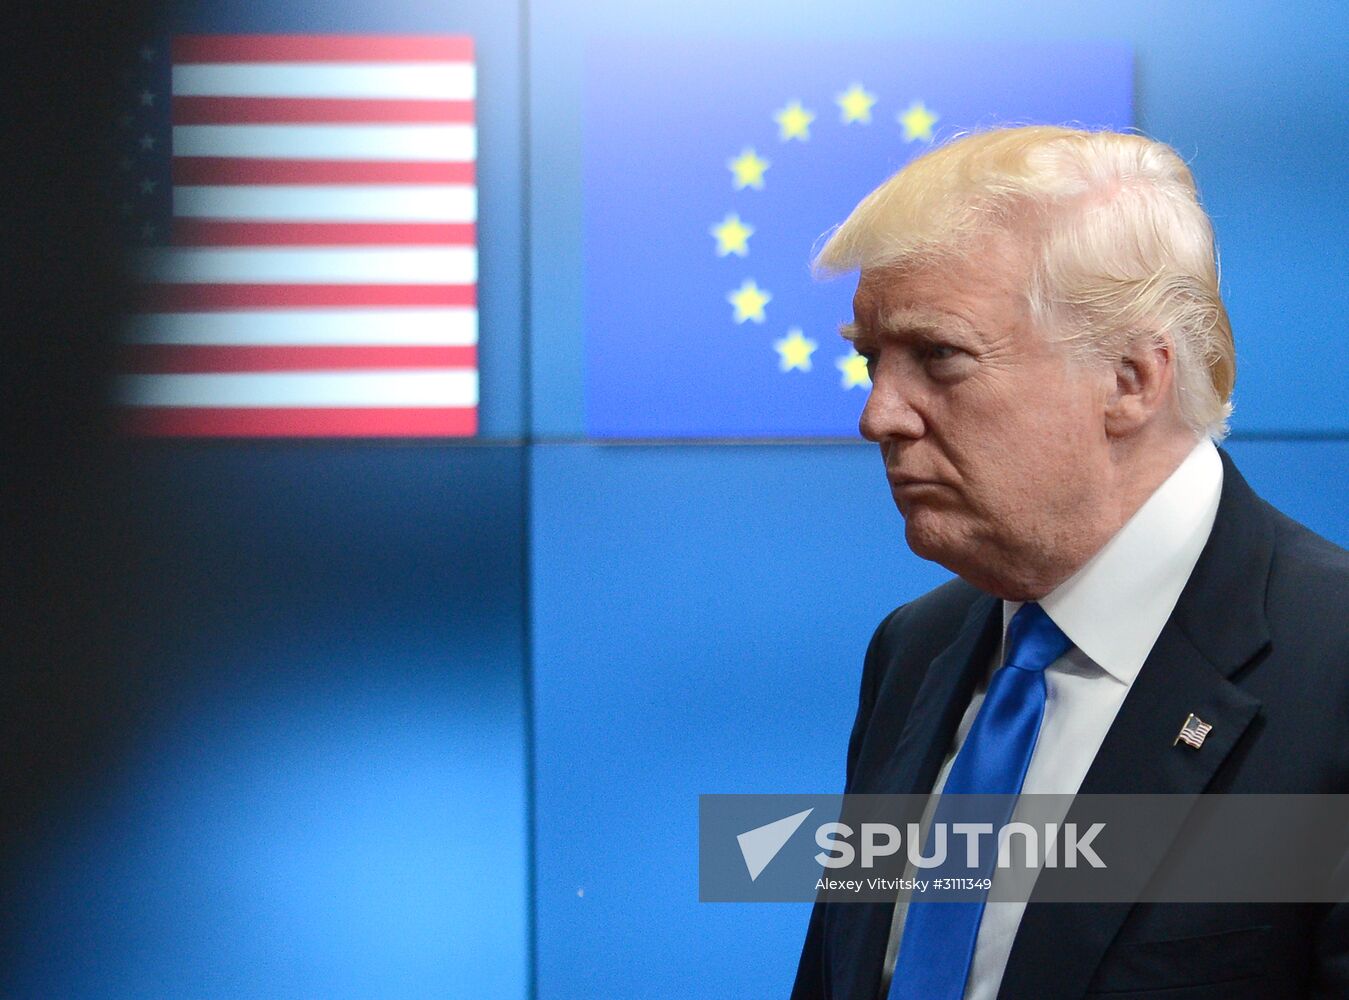 US President Donald Trump meets with European Council leaders in Brussels